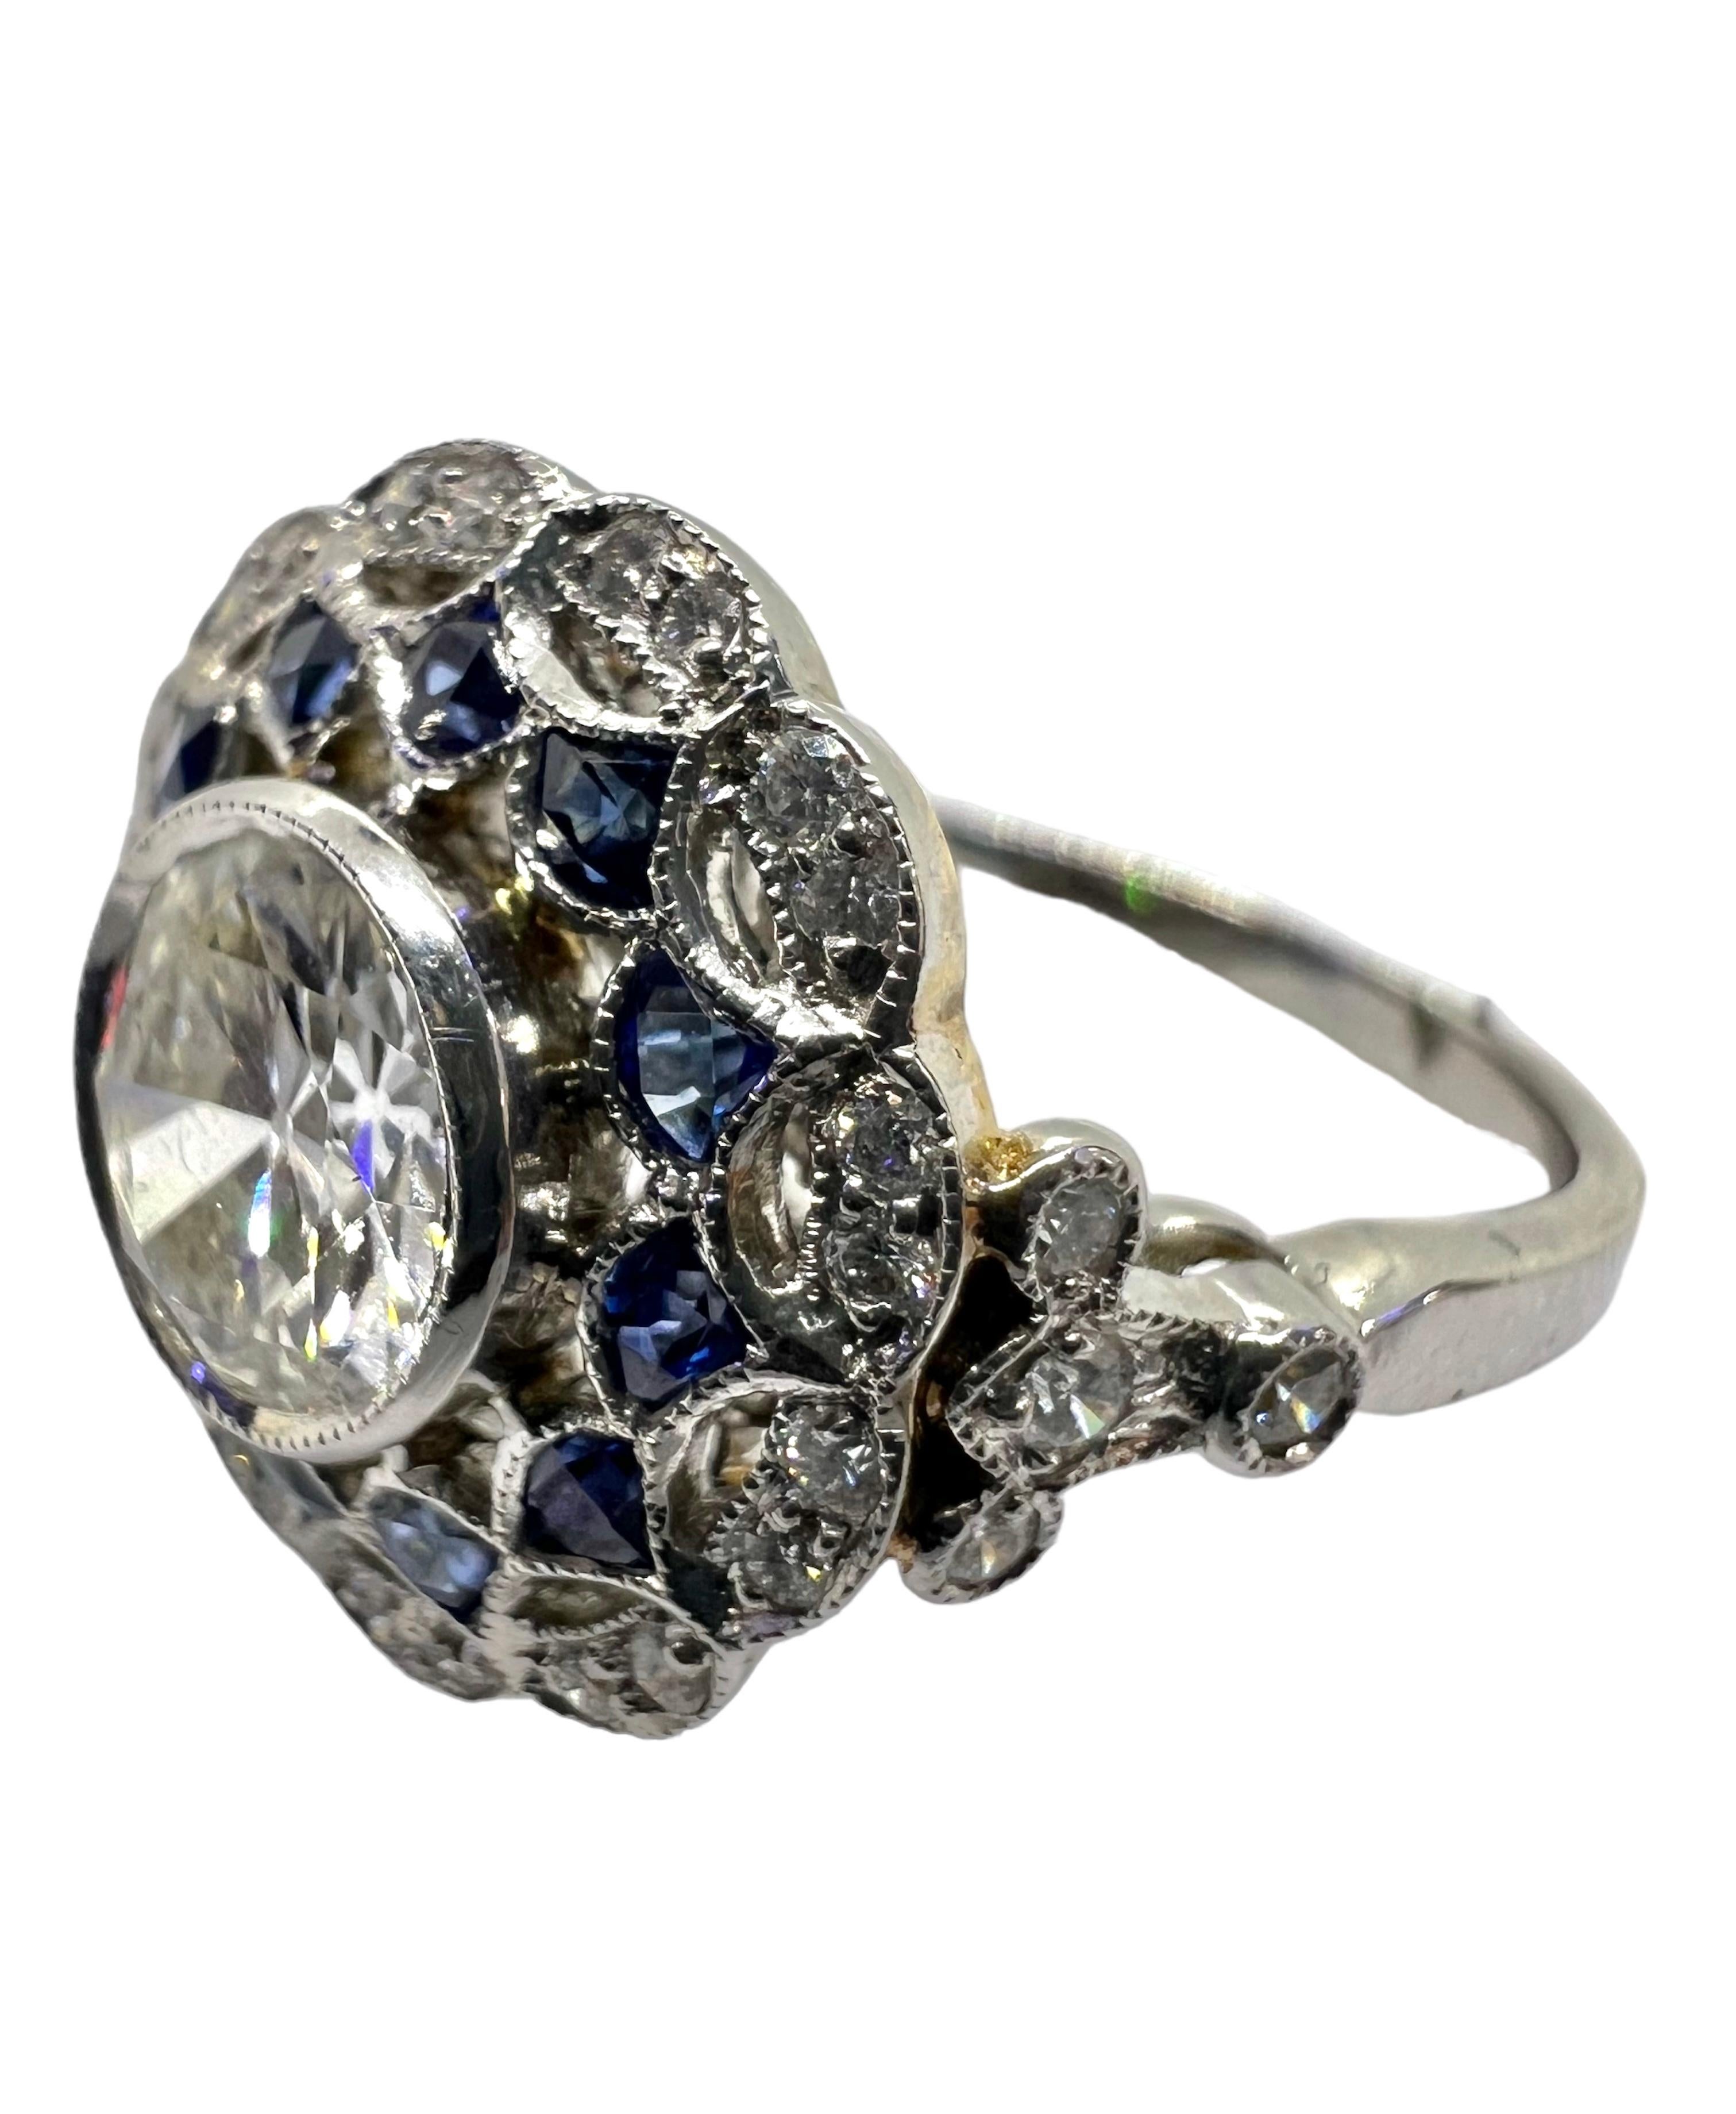 Platinum ring that features a .89 carat center round diamond, .91 carat blue sapphire and .20 carat small diamonds. 

Sophia D by Joseph Dardashti LTD has been known worldwide for 35 years and are inspired by classic Art Deco design that merges with